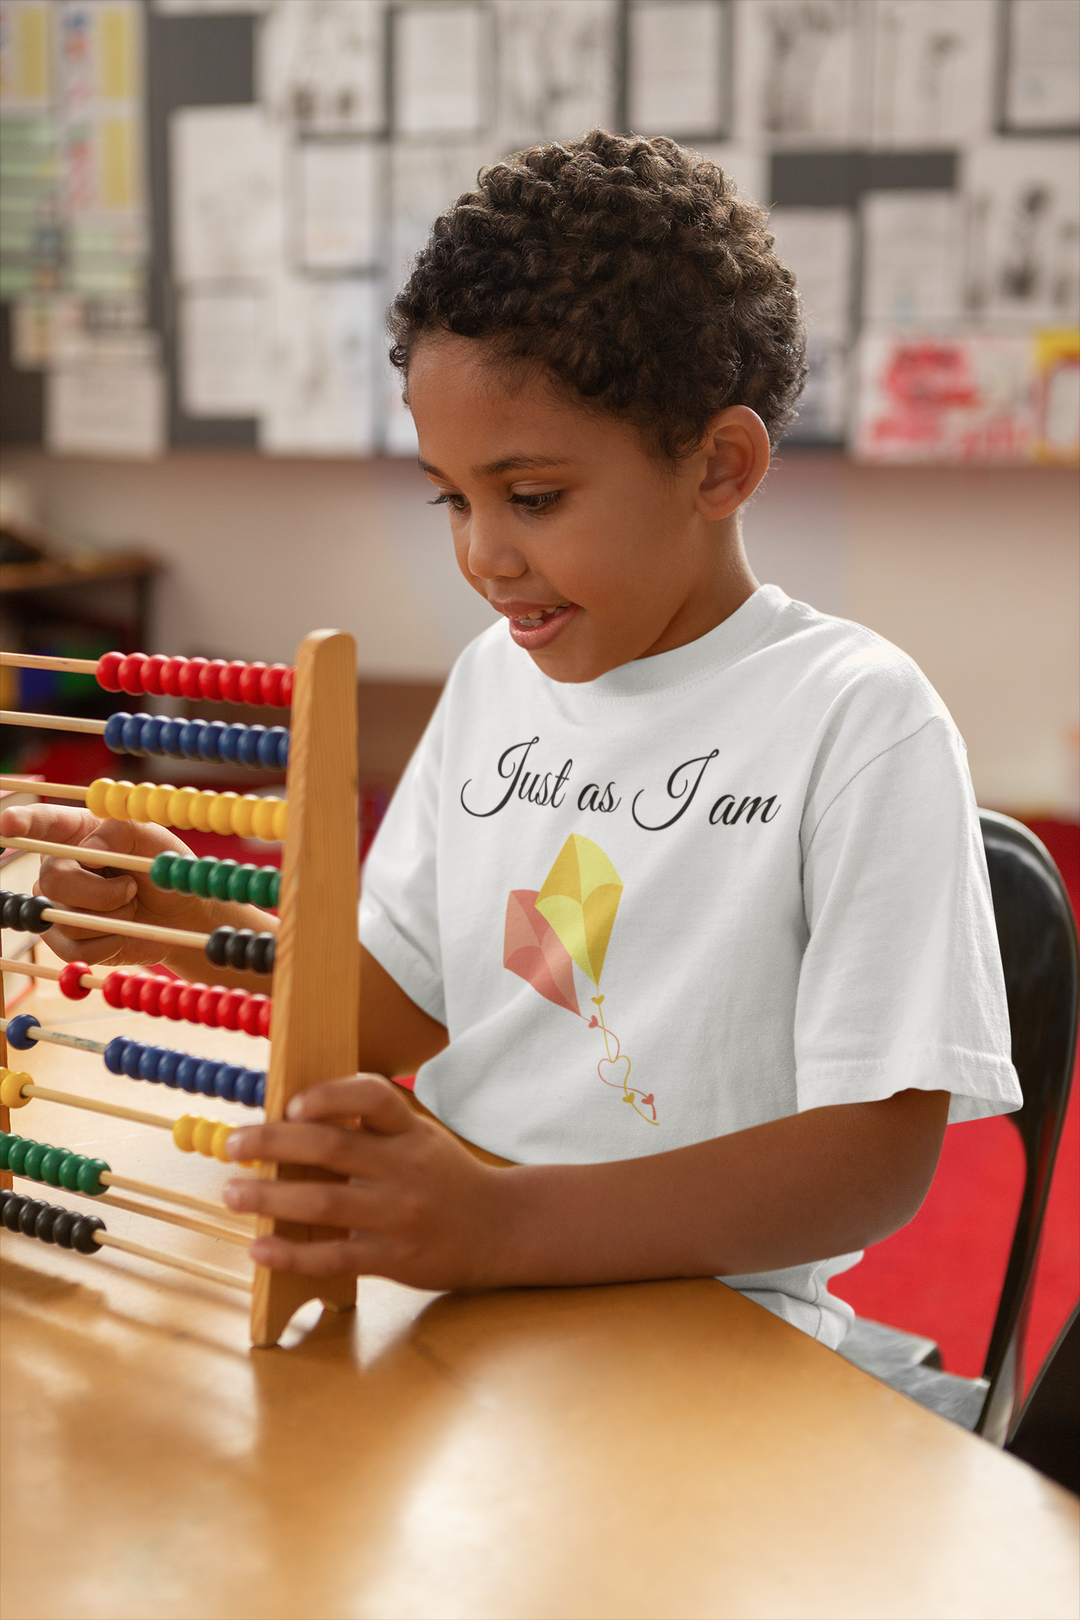 Just as I am. Gospel song graphic t shirt for toddlers and kids.